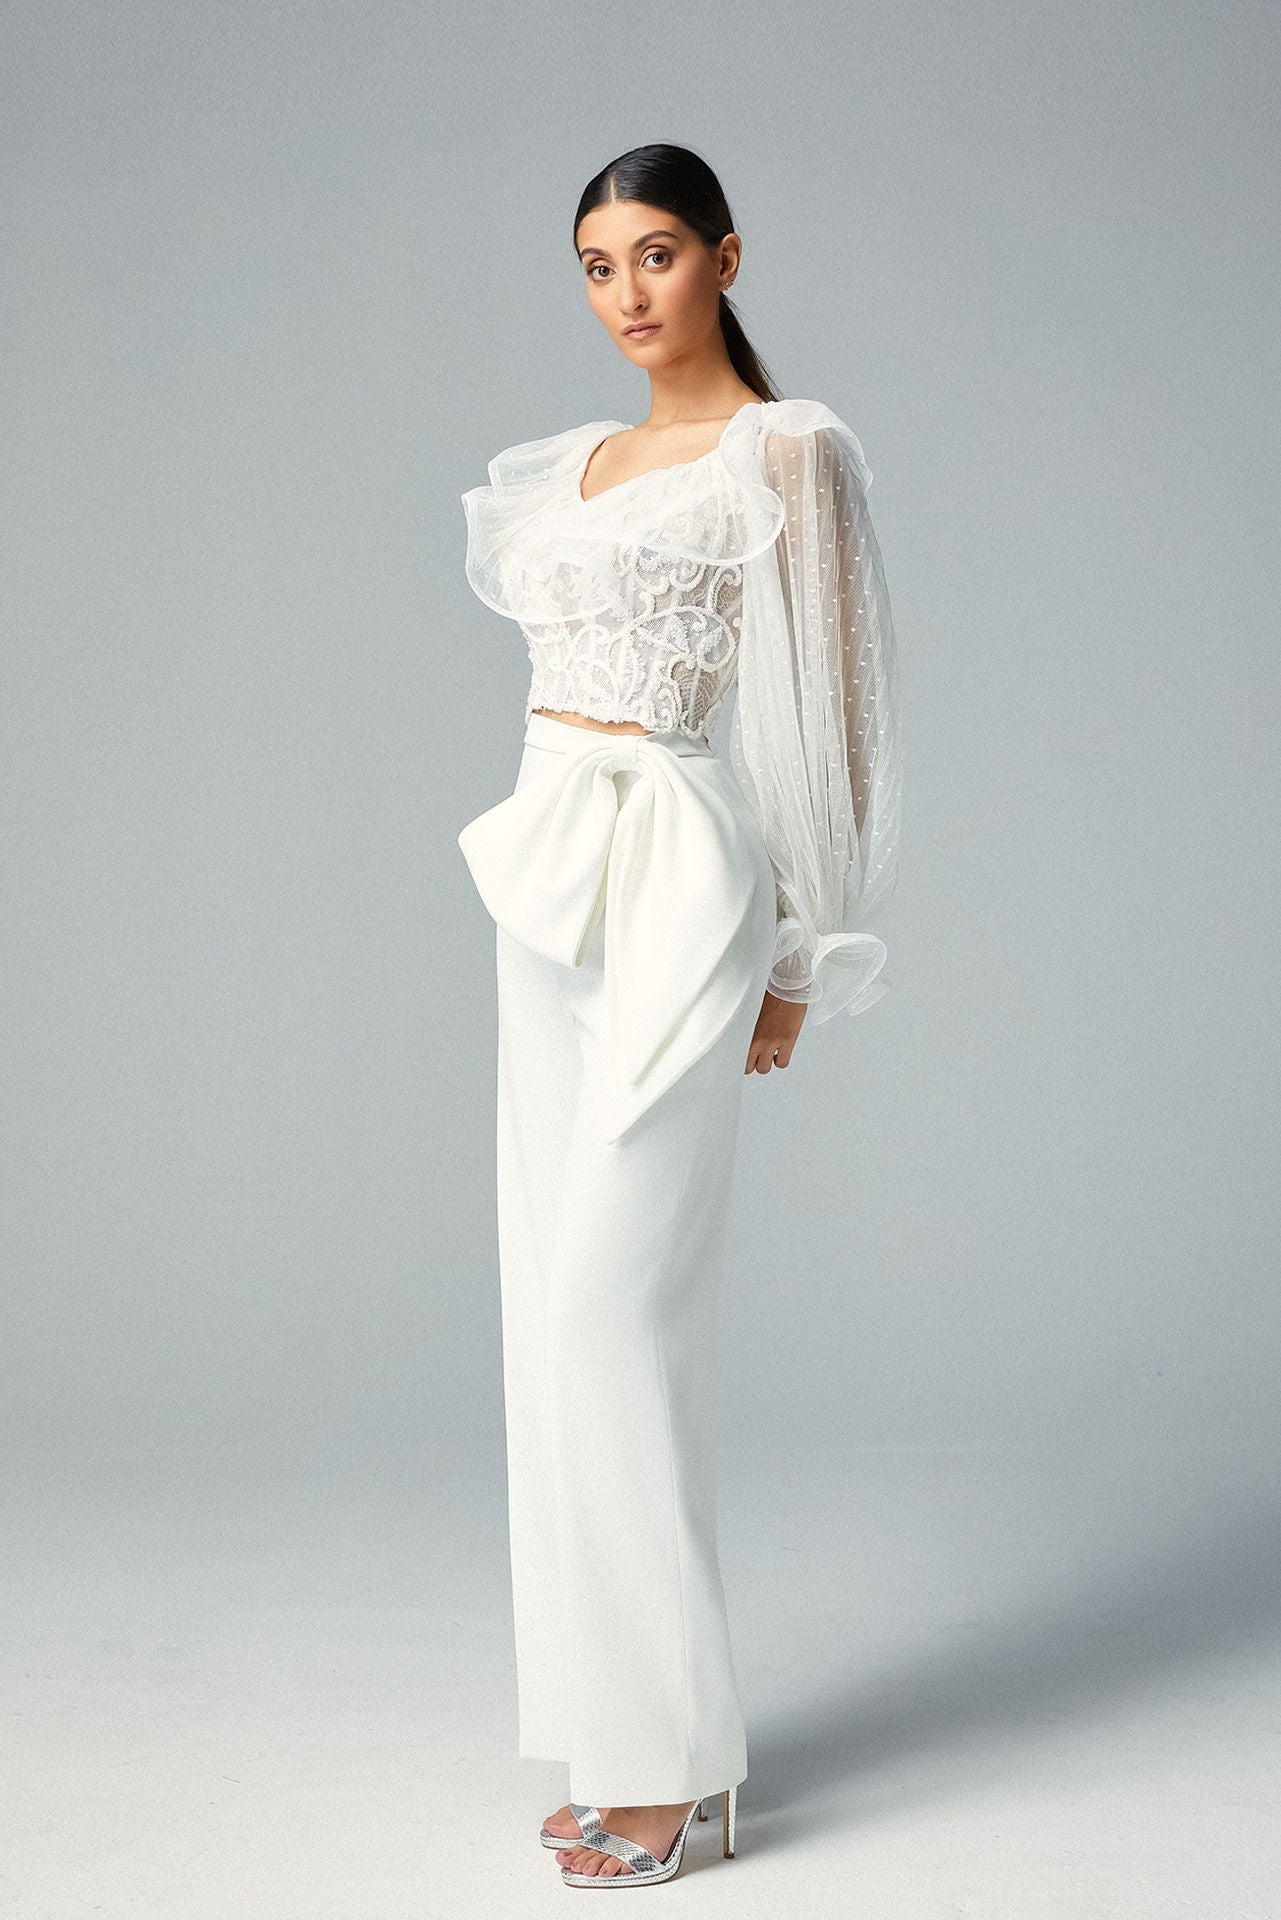 Embroidered White Corset Top Sequined Motifs, Bow Tie White Crepe Pants